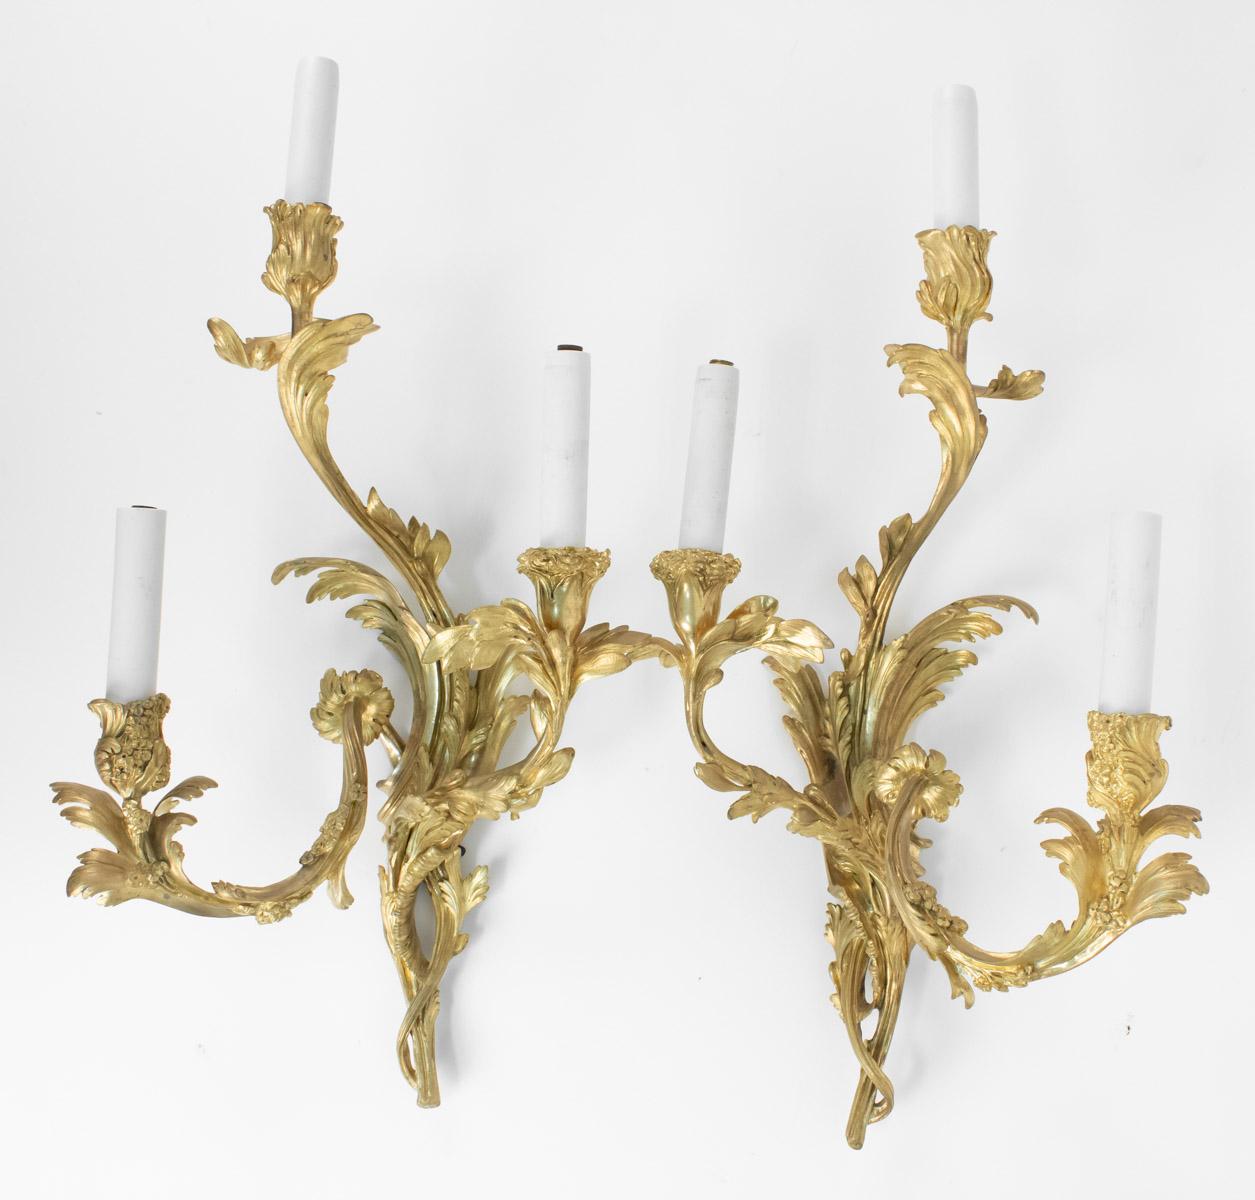 Pair of gilt bronze sconces from the 19th century, Louis XV style, Napoleon III period, 3 lights.
Measures: H 63cm, W 36cm, W 20cm.